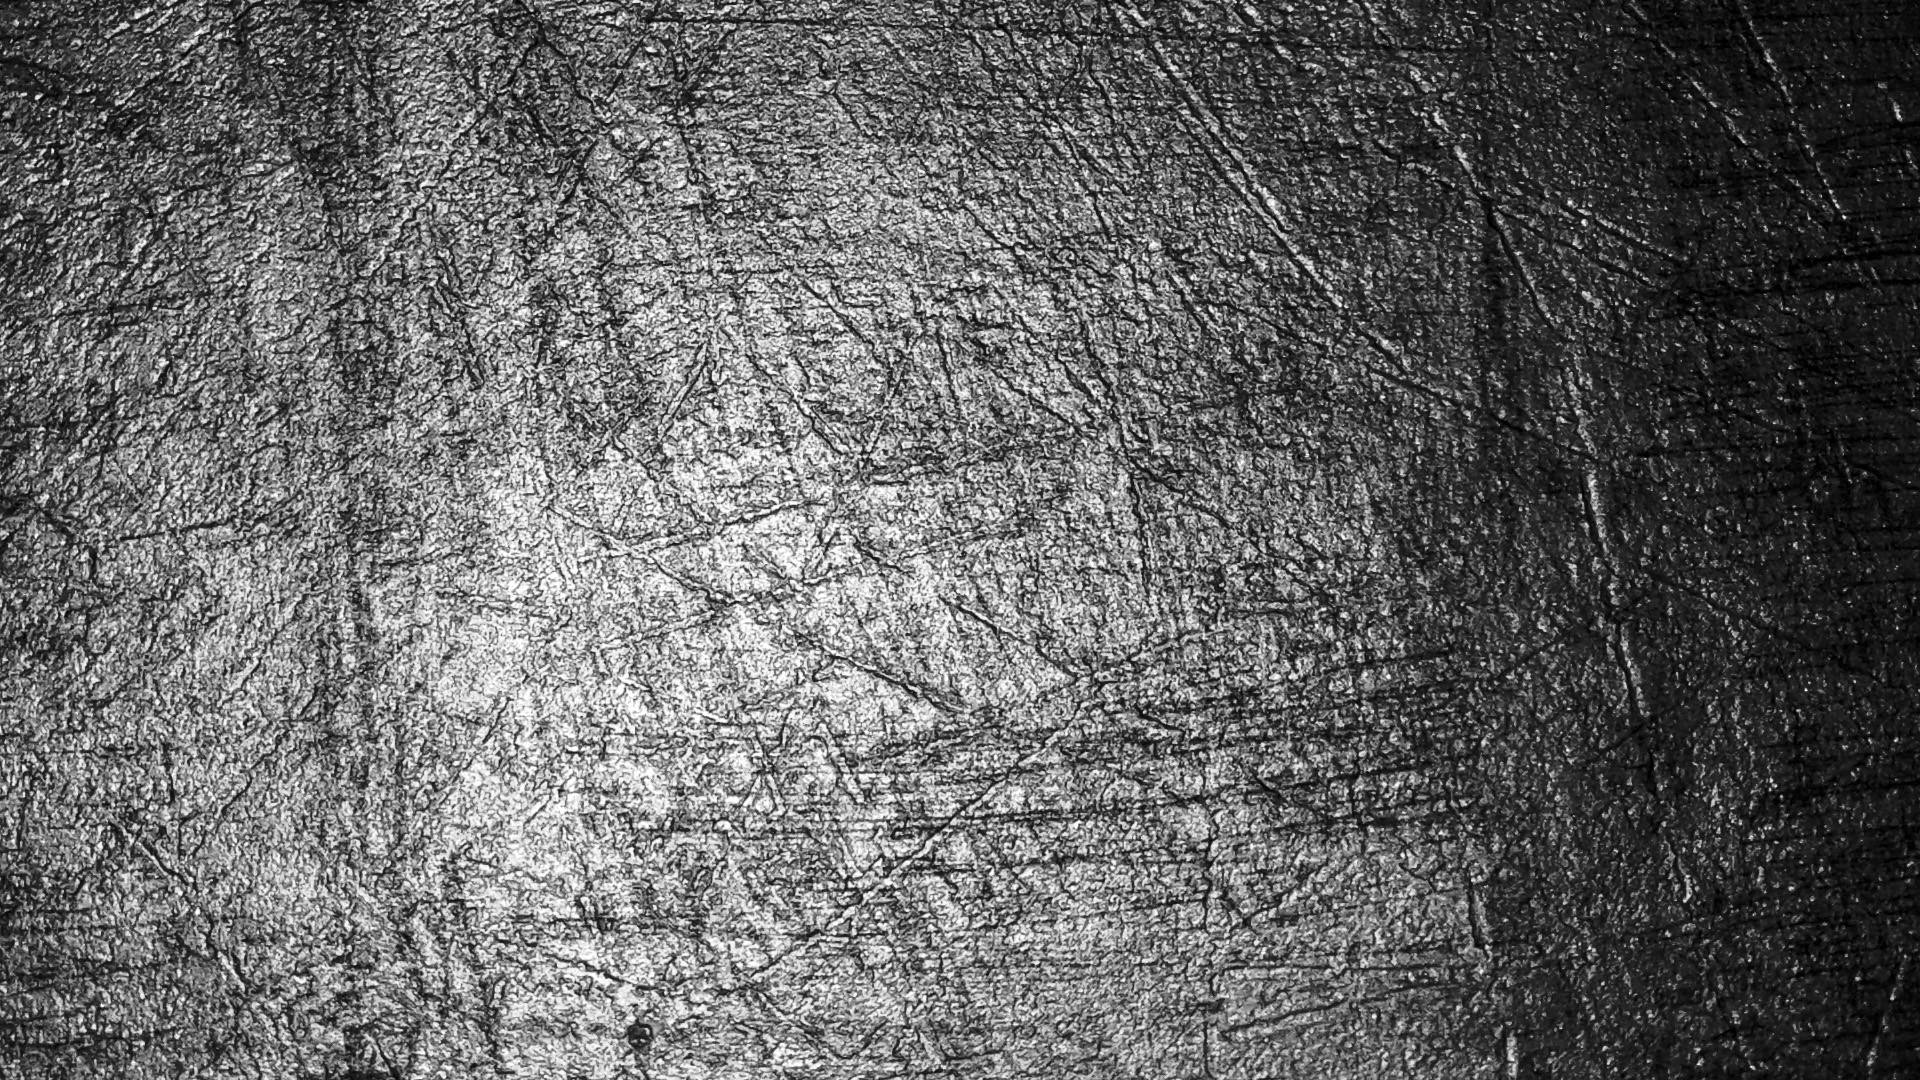 Scratched Metal Texture HD Image Gallery